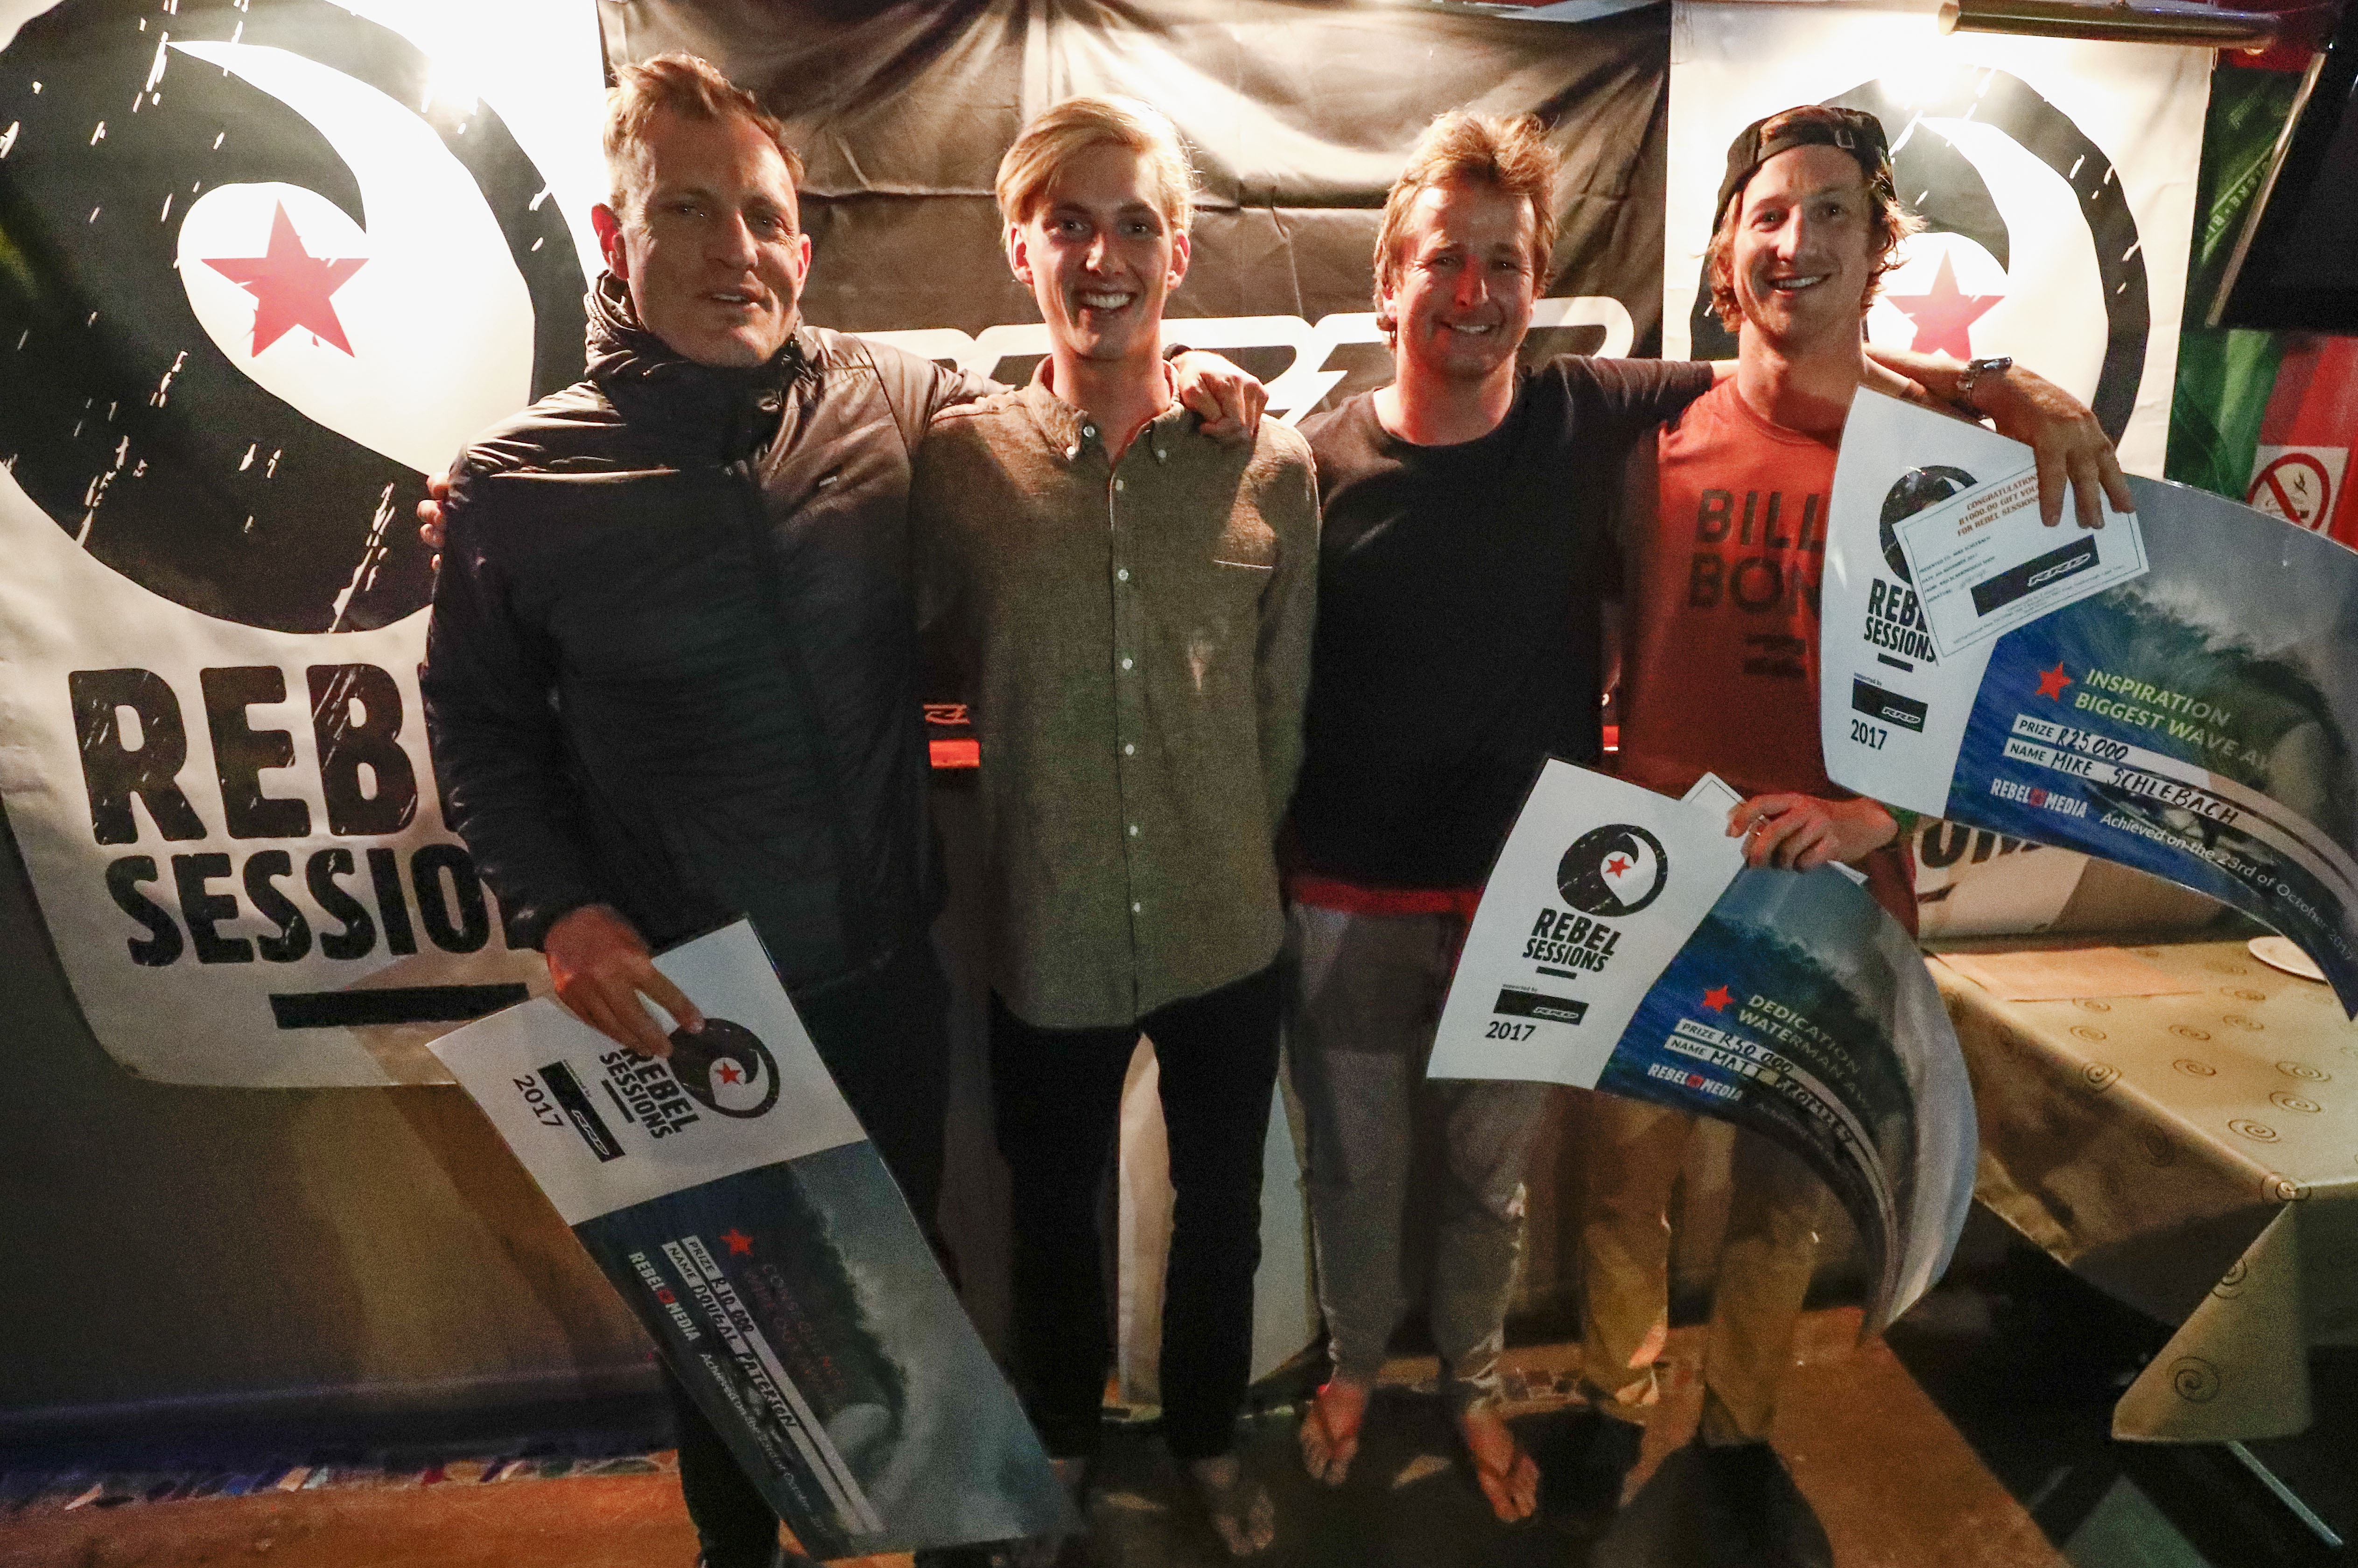 REBEL Sessions – Big Wave award ceremony in South Africa